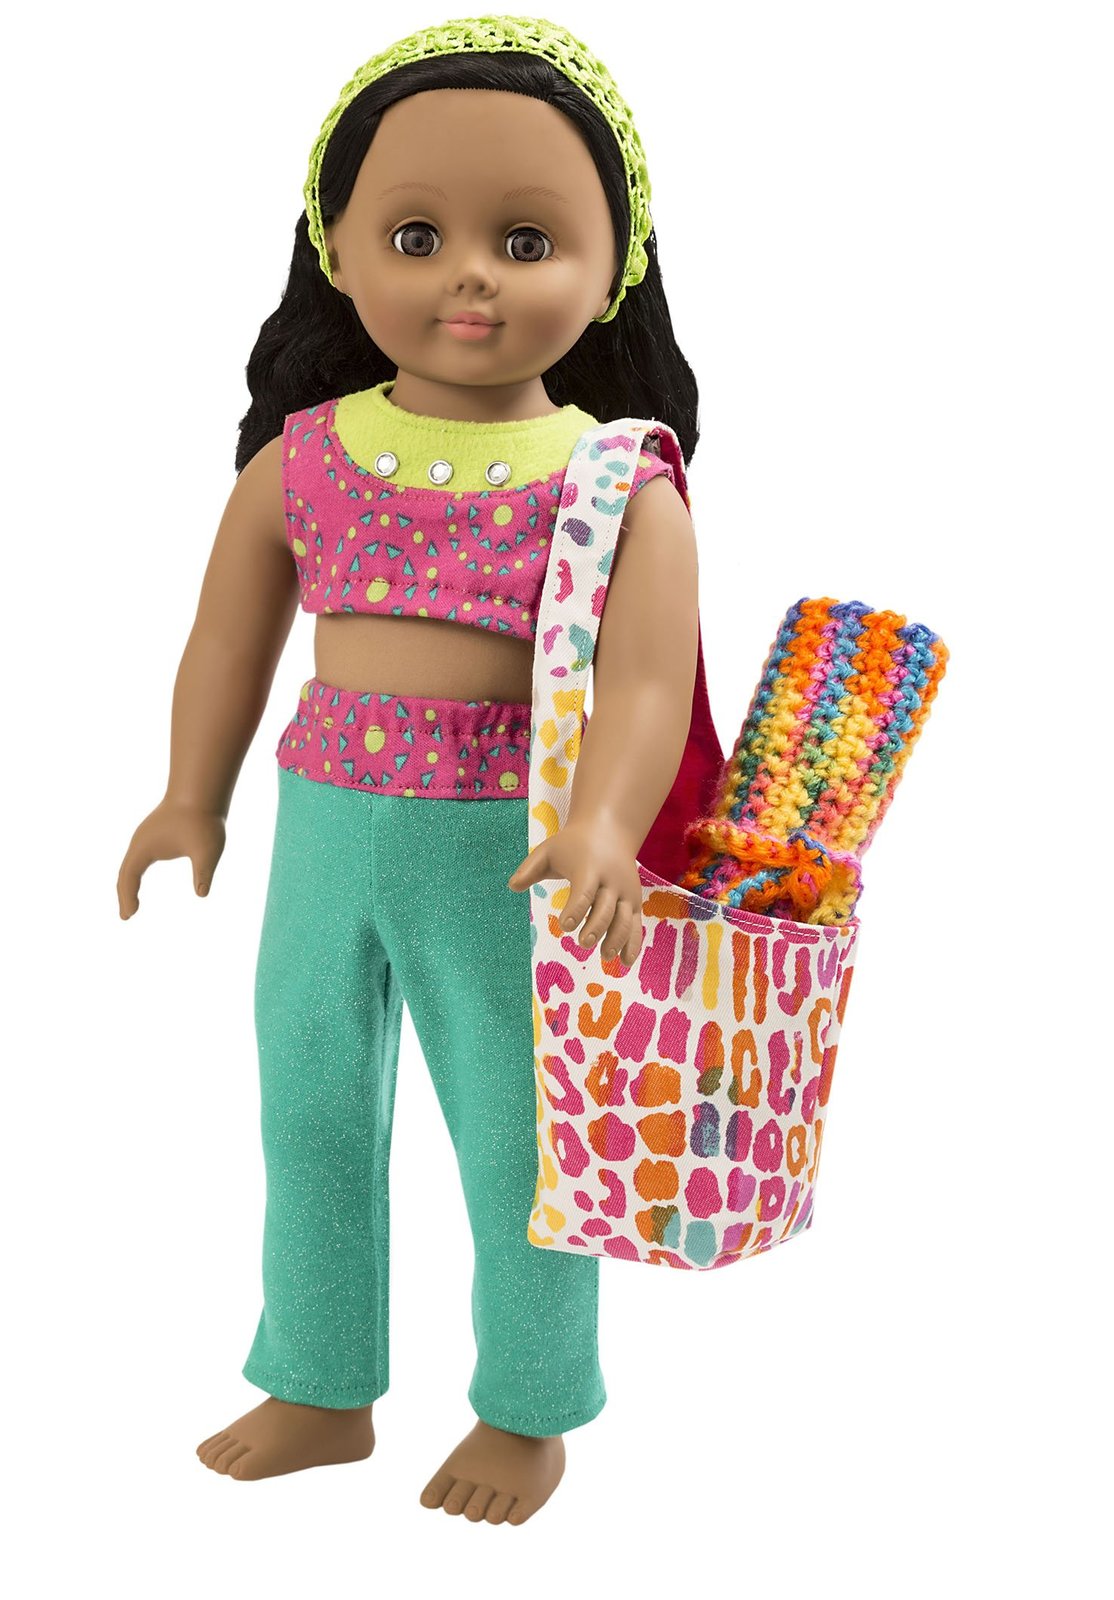 Dimensions Simplicity Creative Patterns 1513 Doll Clothes and Bag, 18-Inch - $7.99